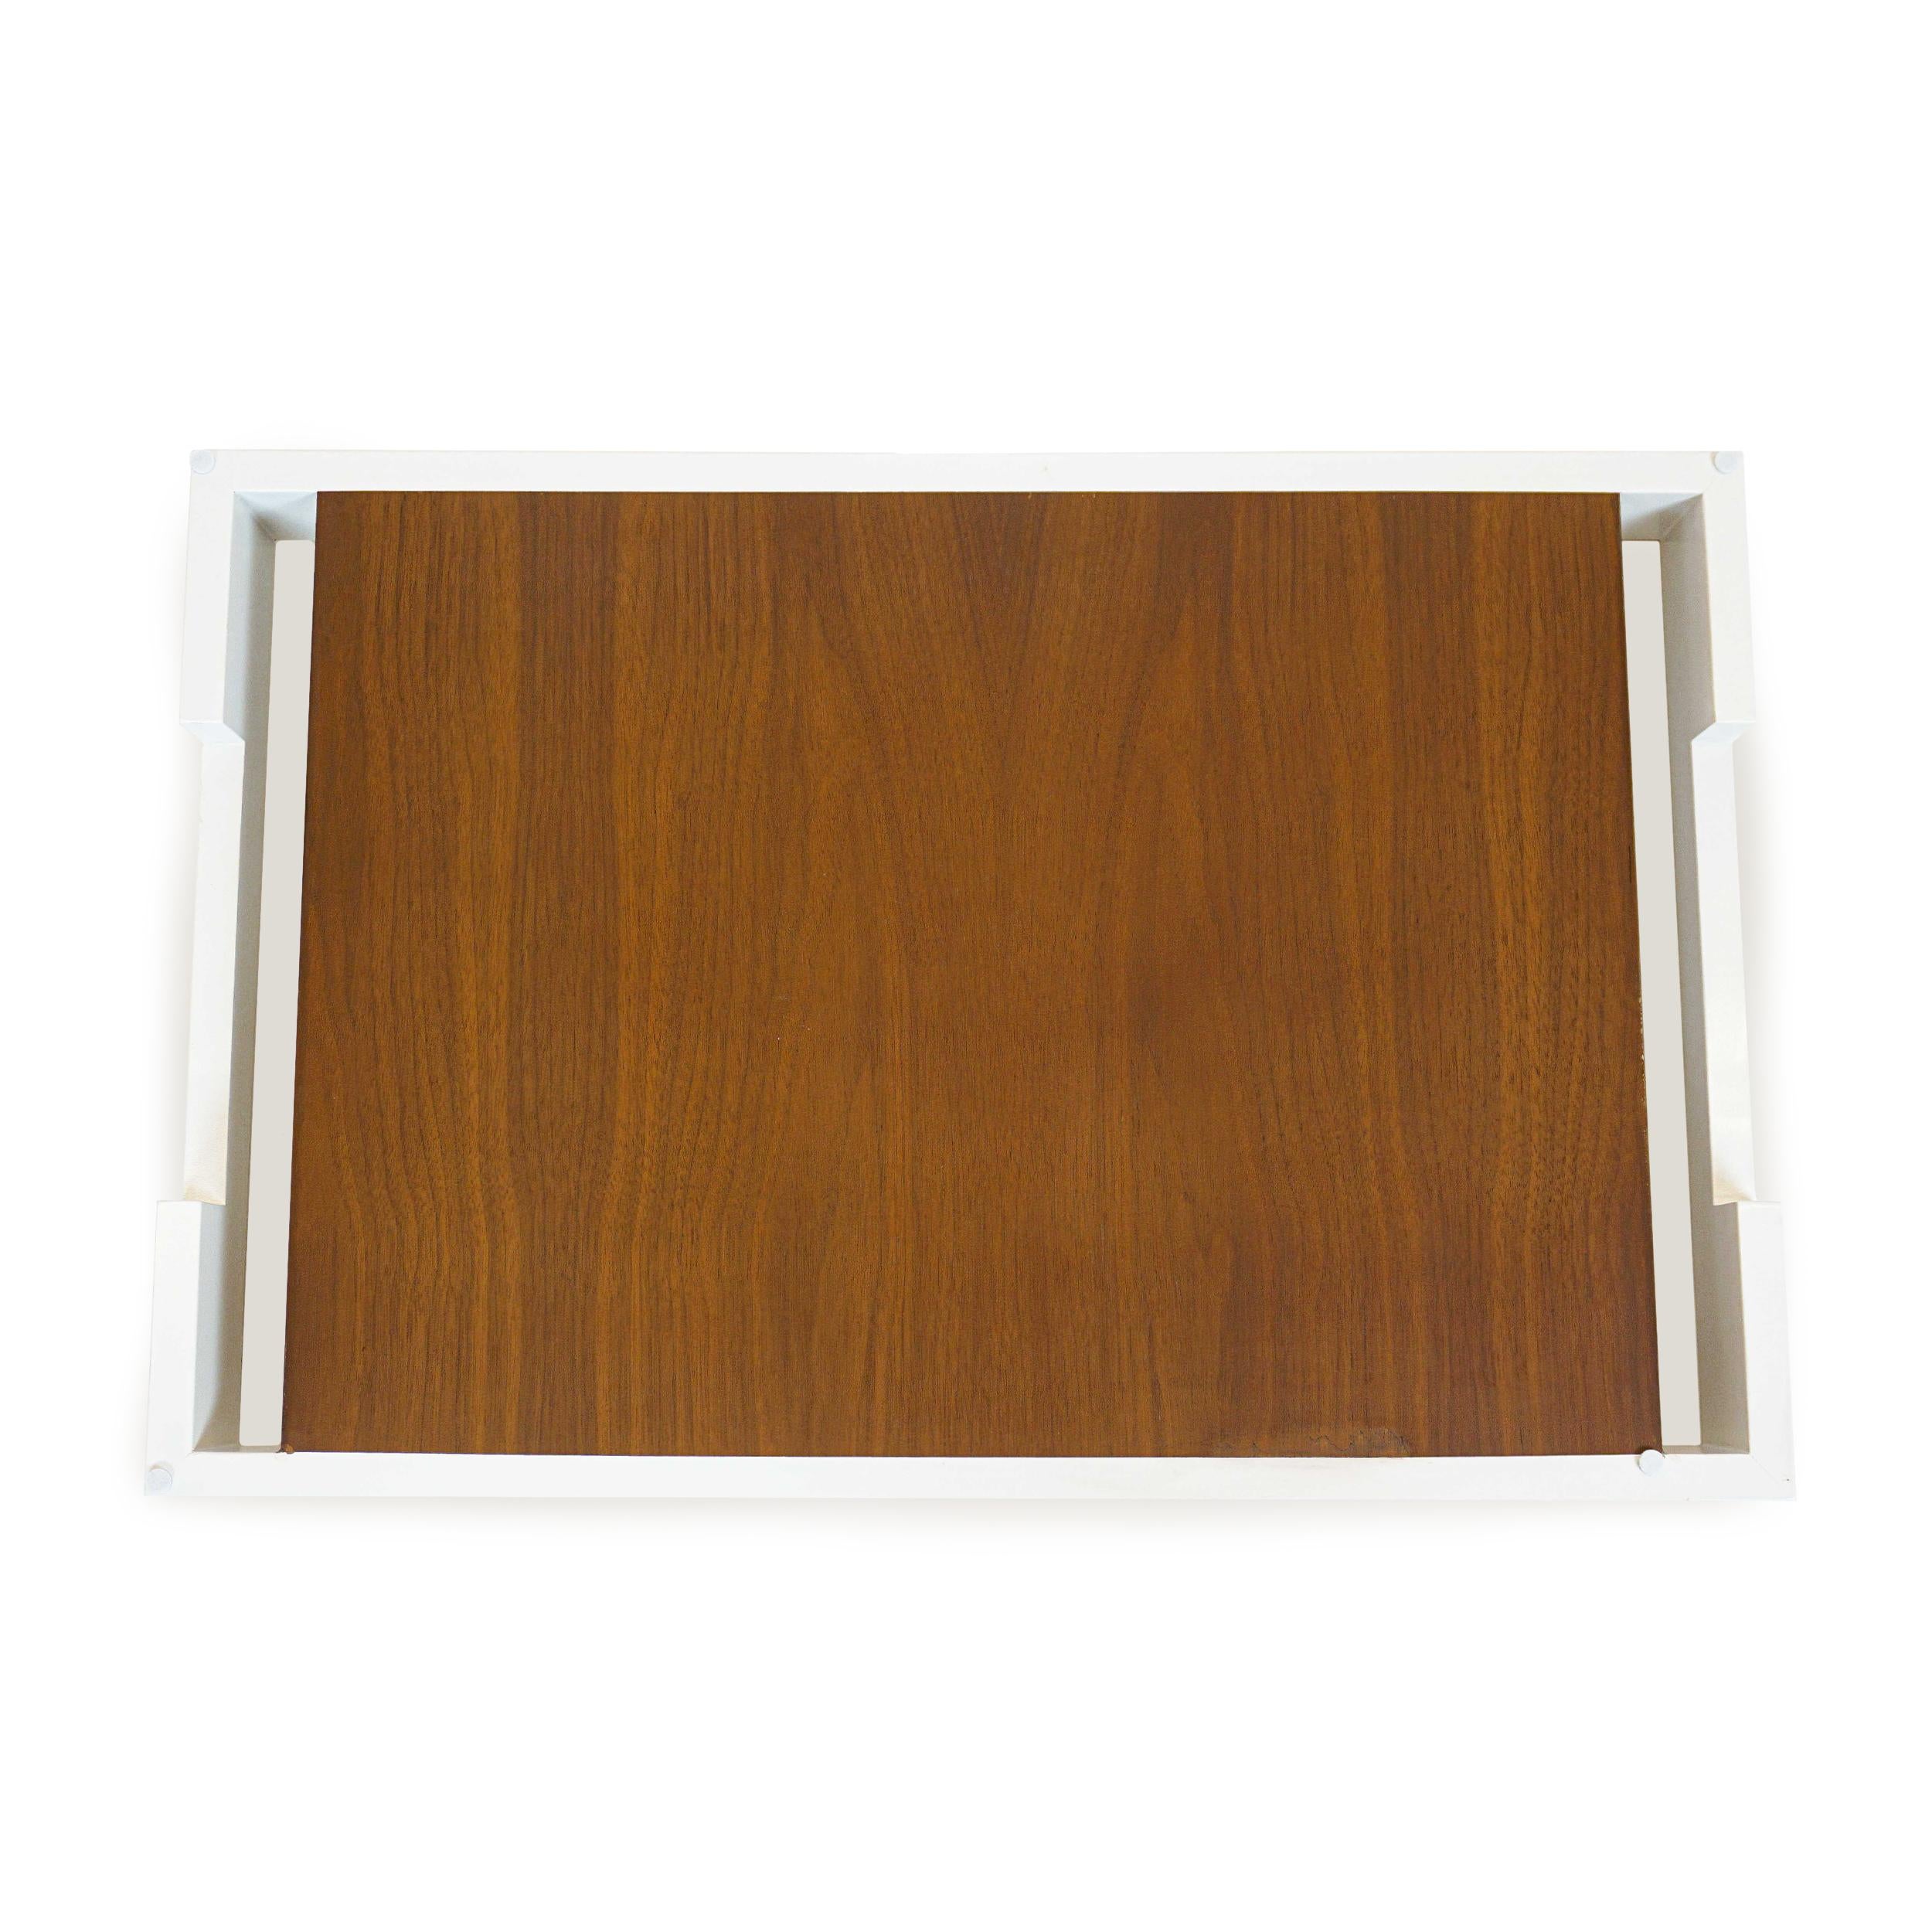 Walnut Center Tray with White Lacquer Exterior In New Condition For Sale In Greenwich, CT